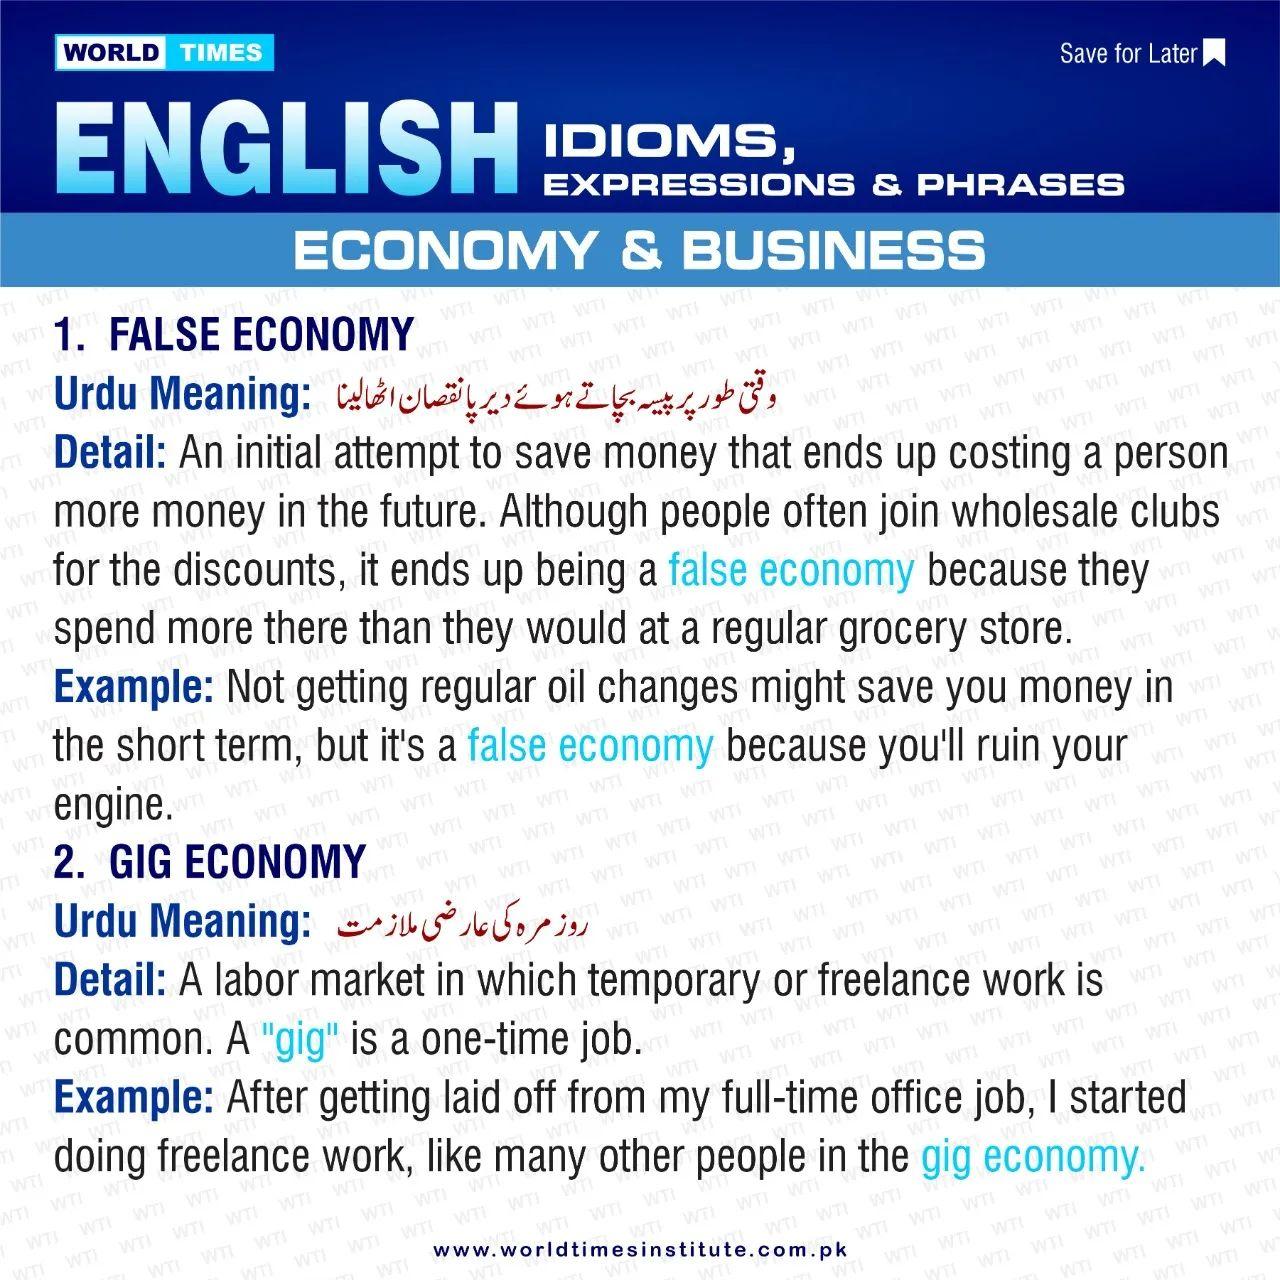 You are currently viewing English Idioms Expressions & Phrases 22-07-14